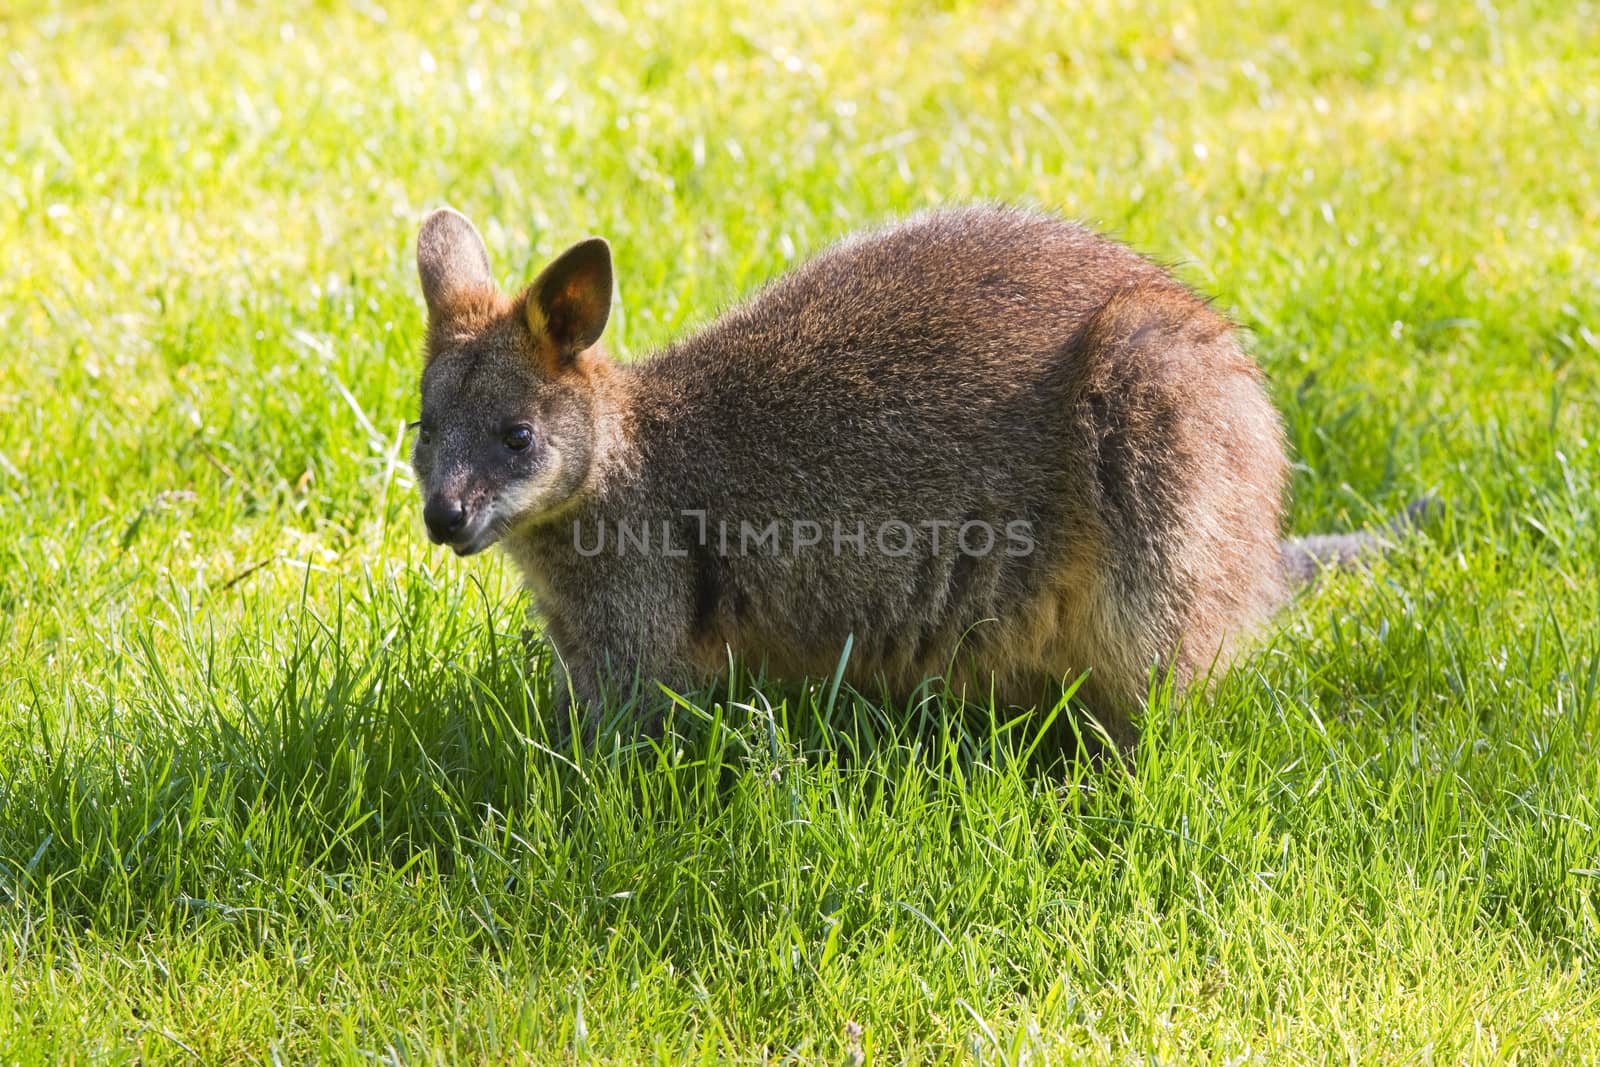 Swamp- or Black Wallaby by Colette